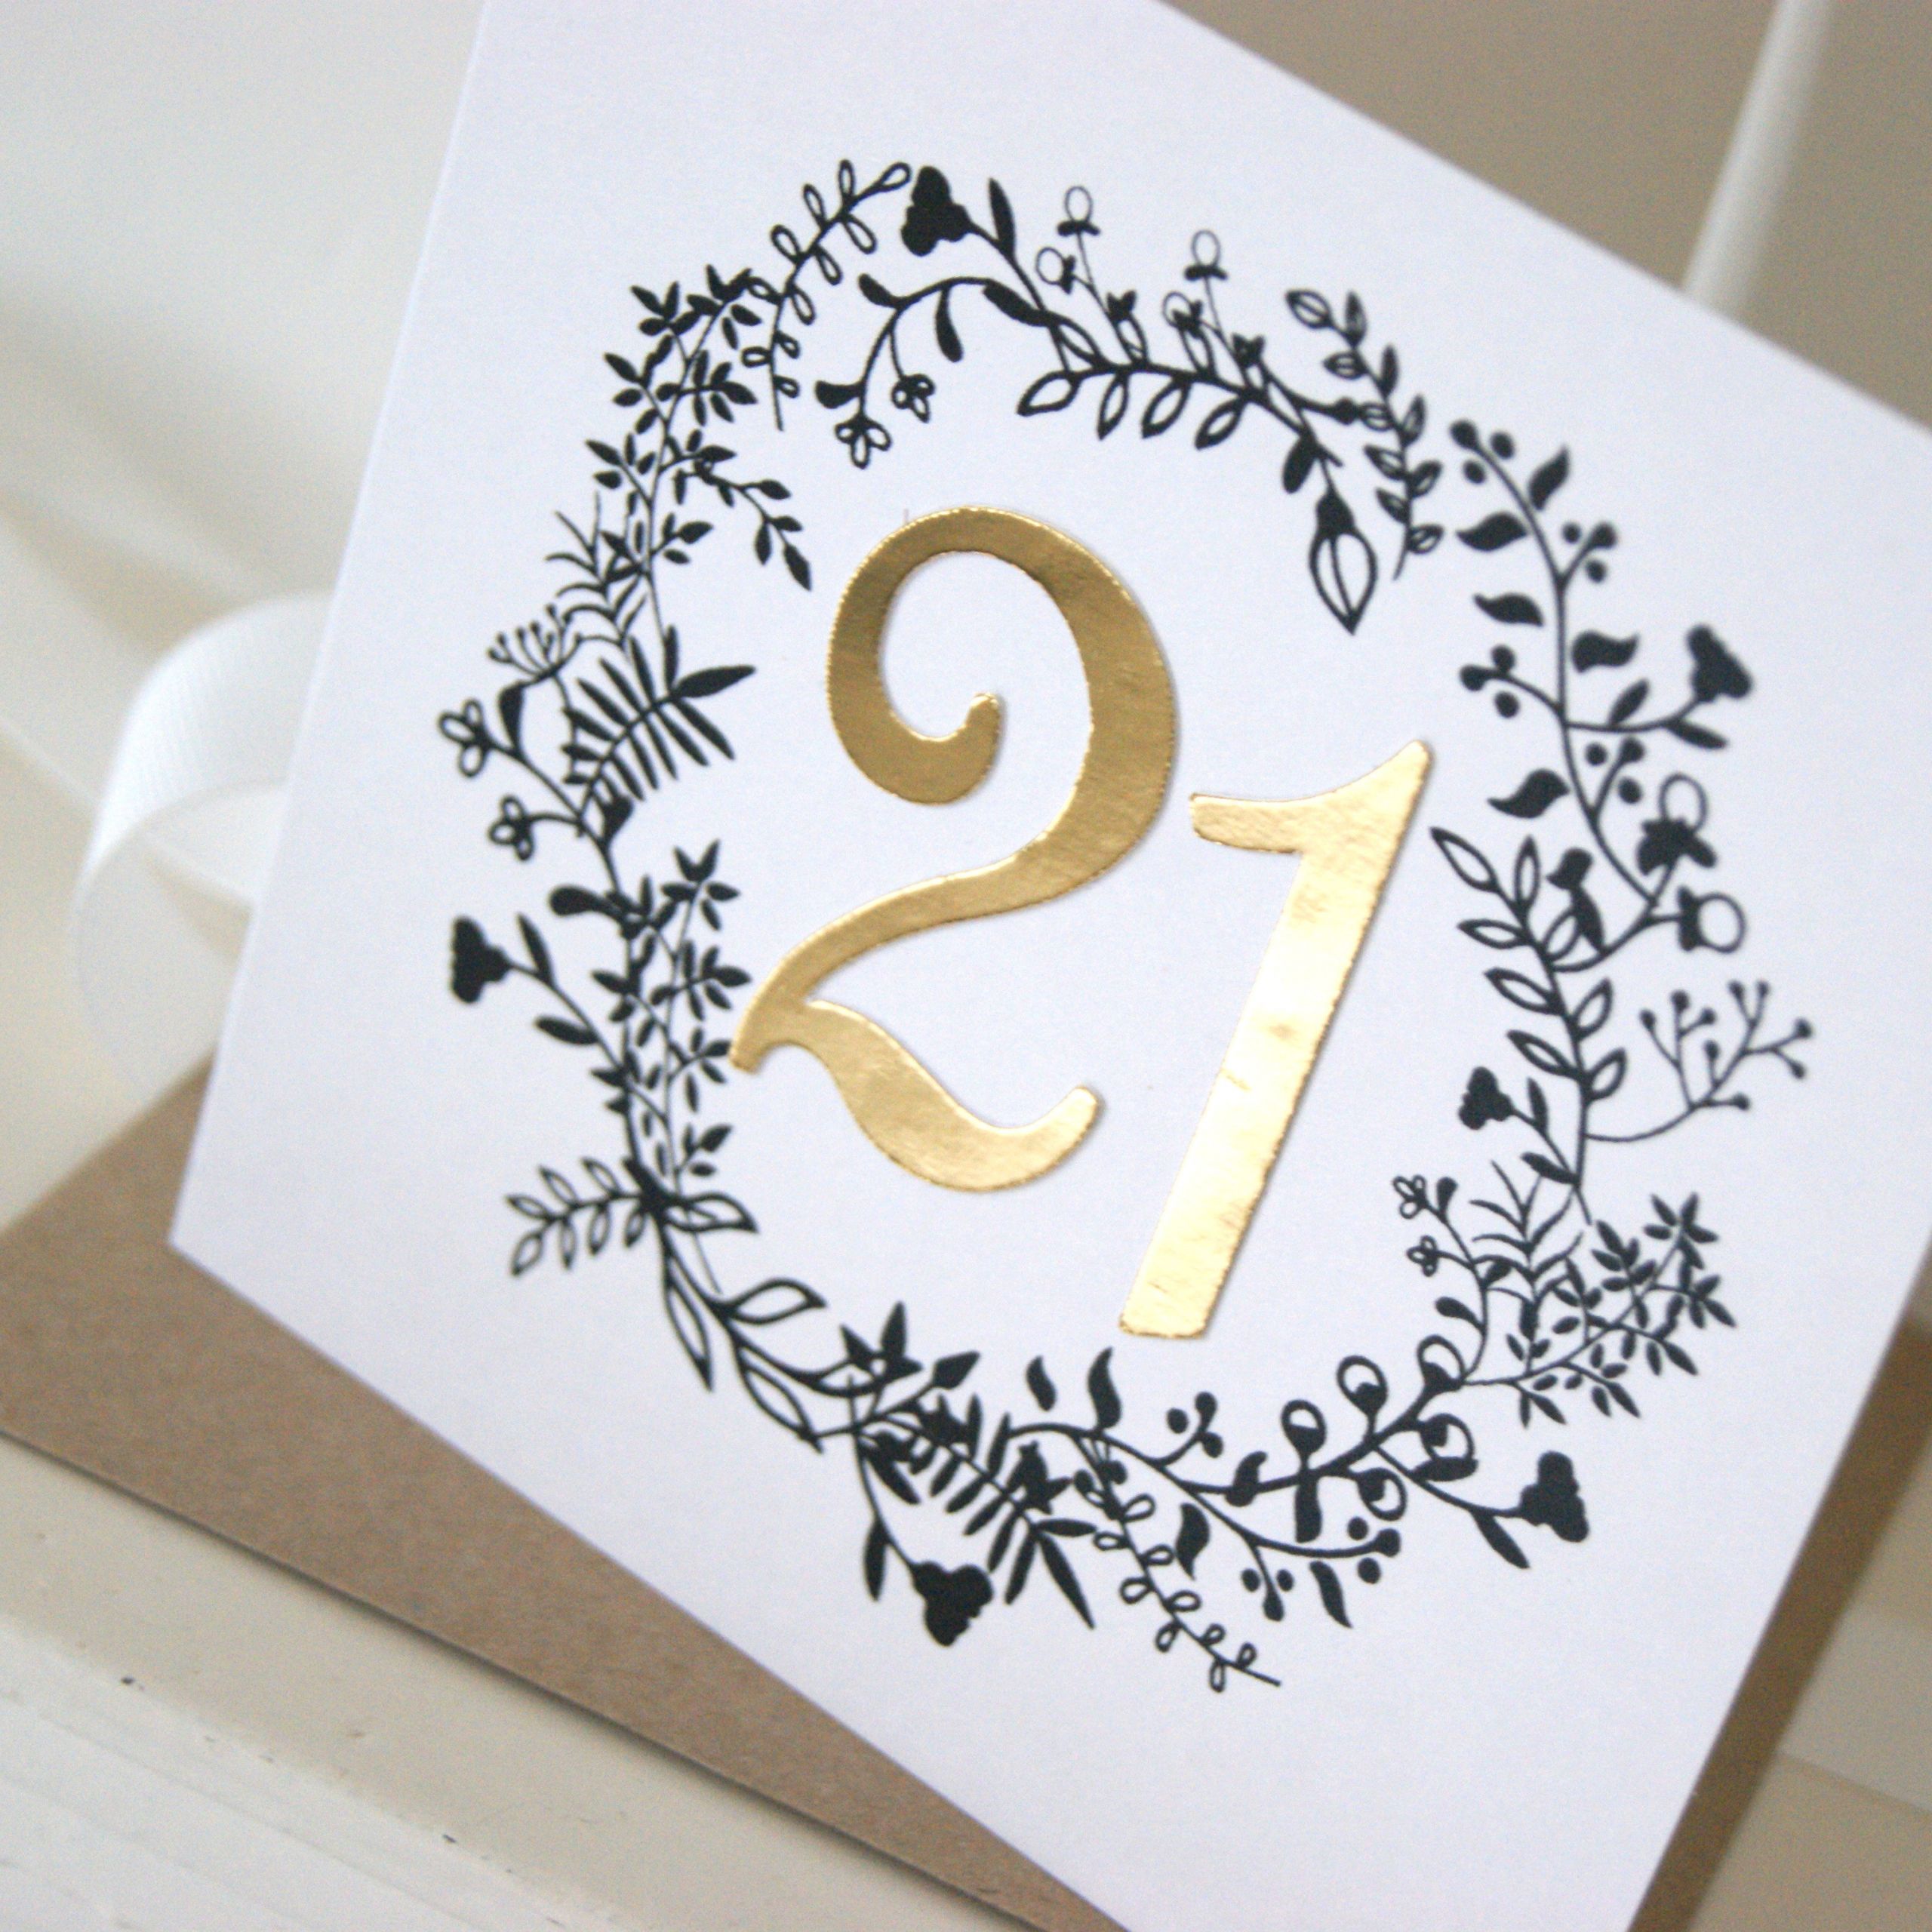 21st Birthday Card
 Luxe Gold 21st Birthday Card